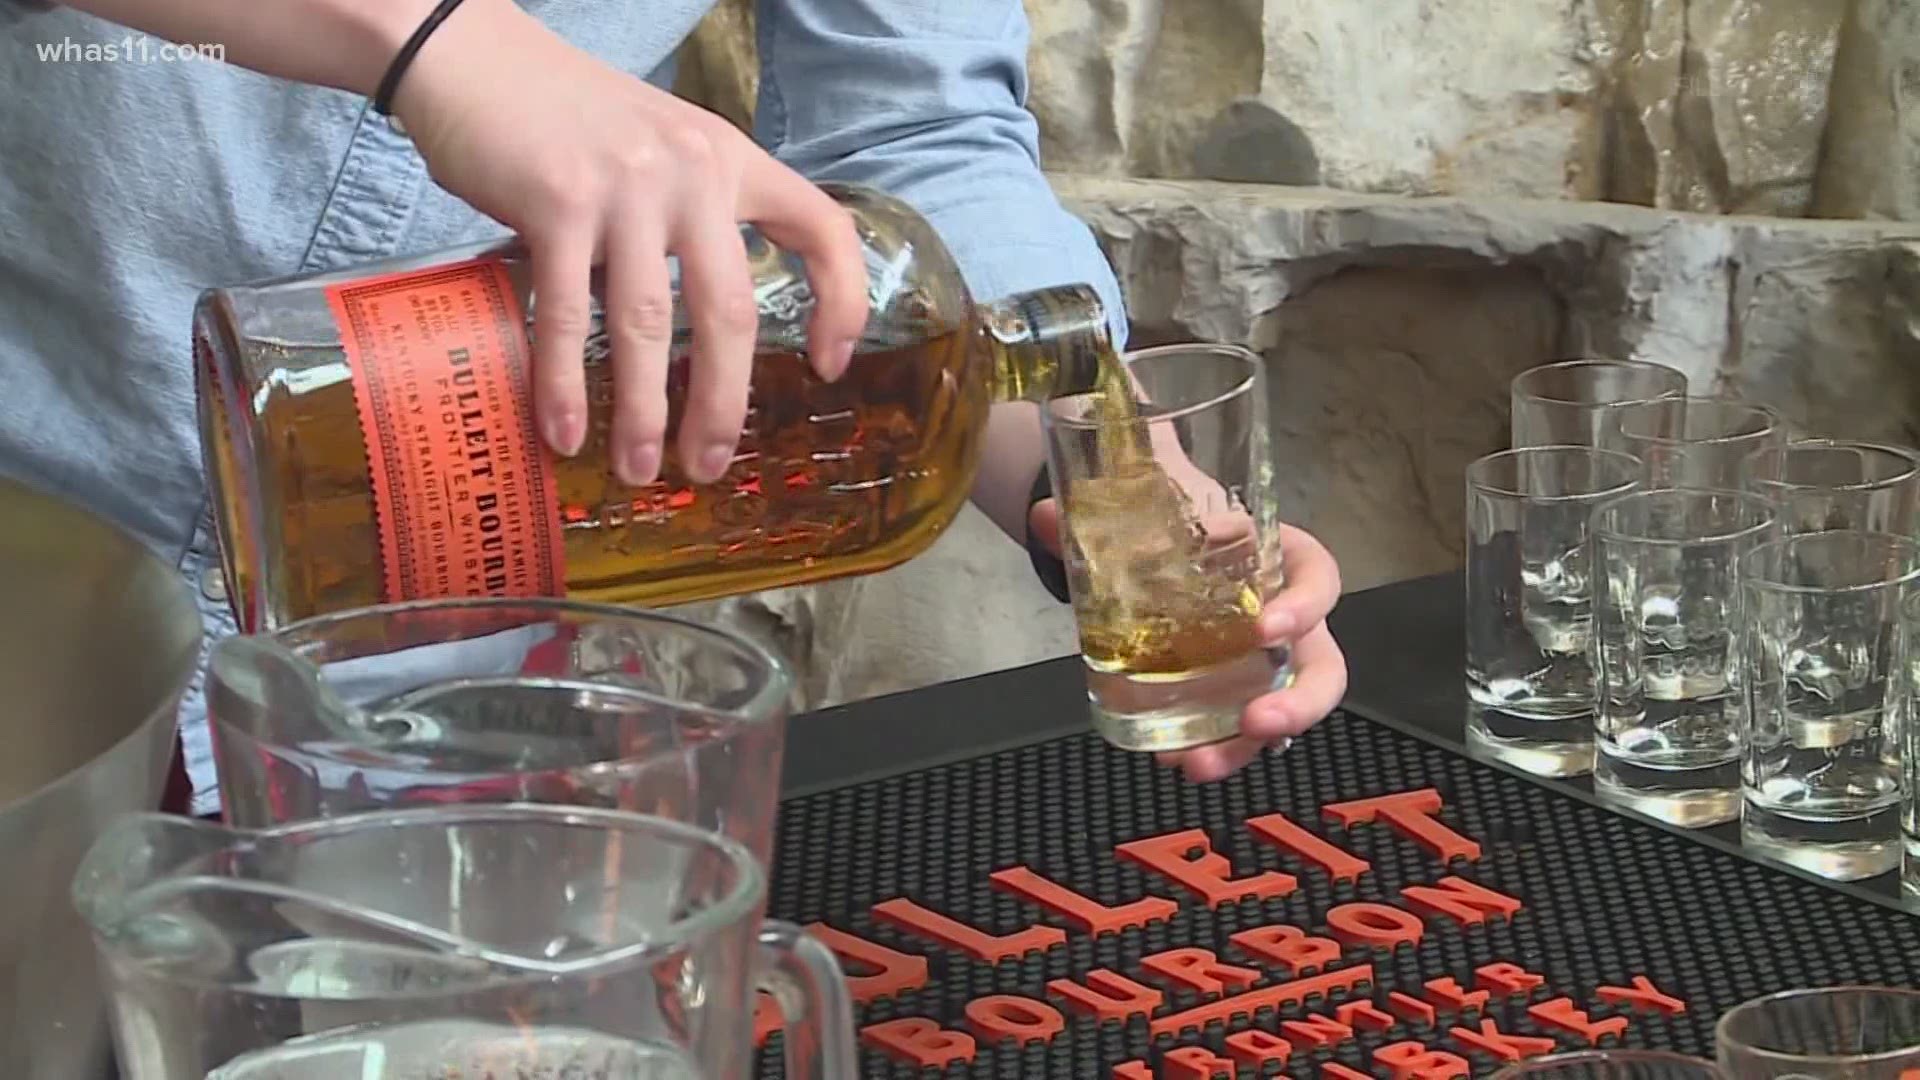 After a year of COVID-19 restrictions, Kentucky's bourbon industry is overflowing with visitors